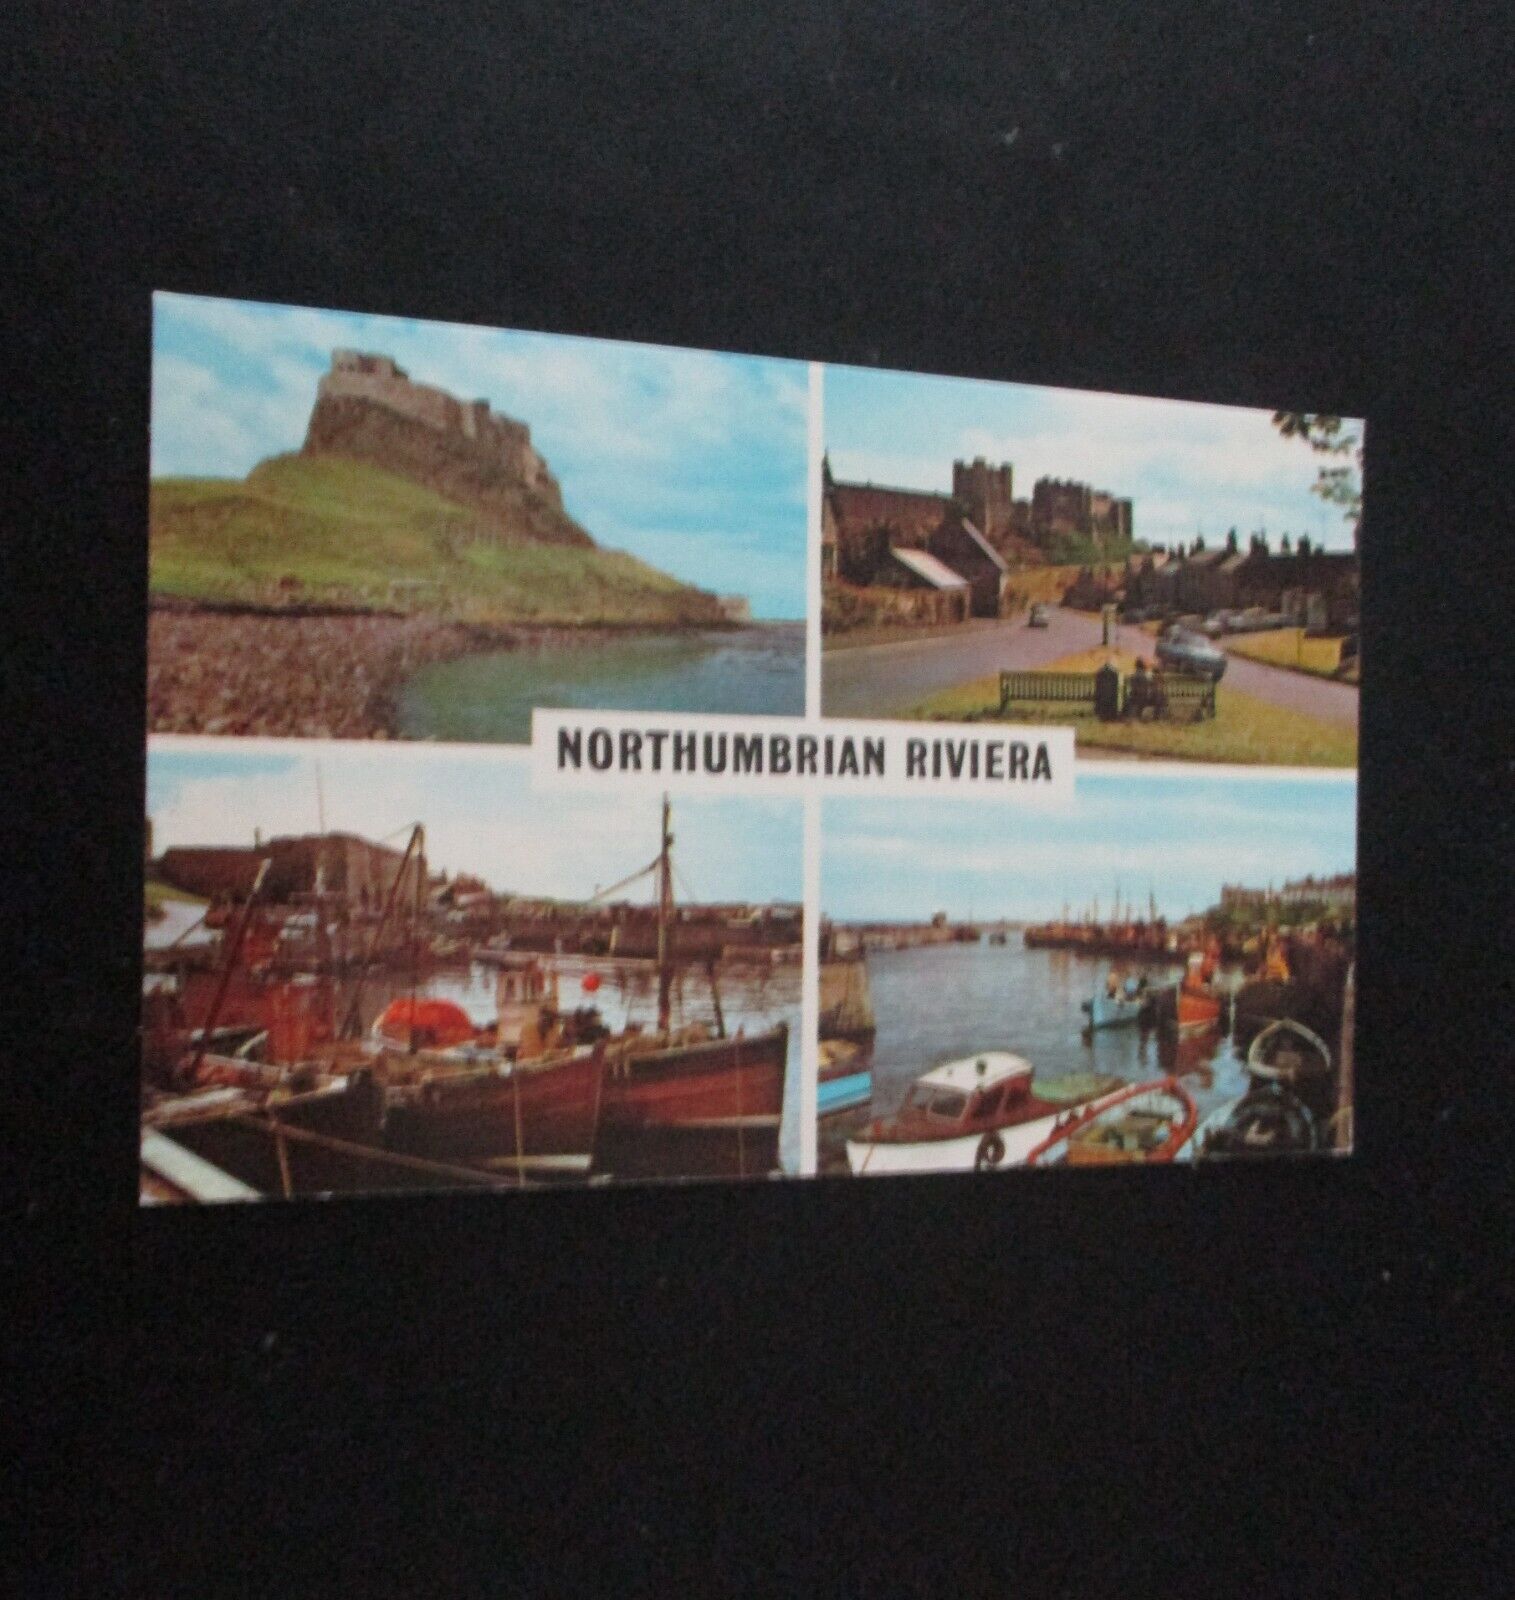 House Clearance - NORTHUMBRIAN RIVIERA -Multiview- Lindisfarne Castle, Seahouses Harbour, Bamburgh